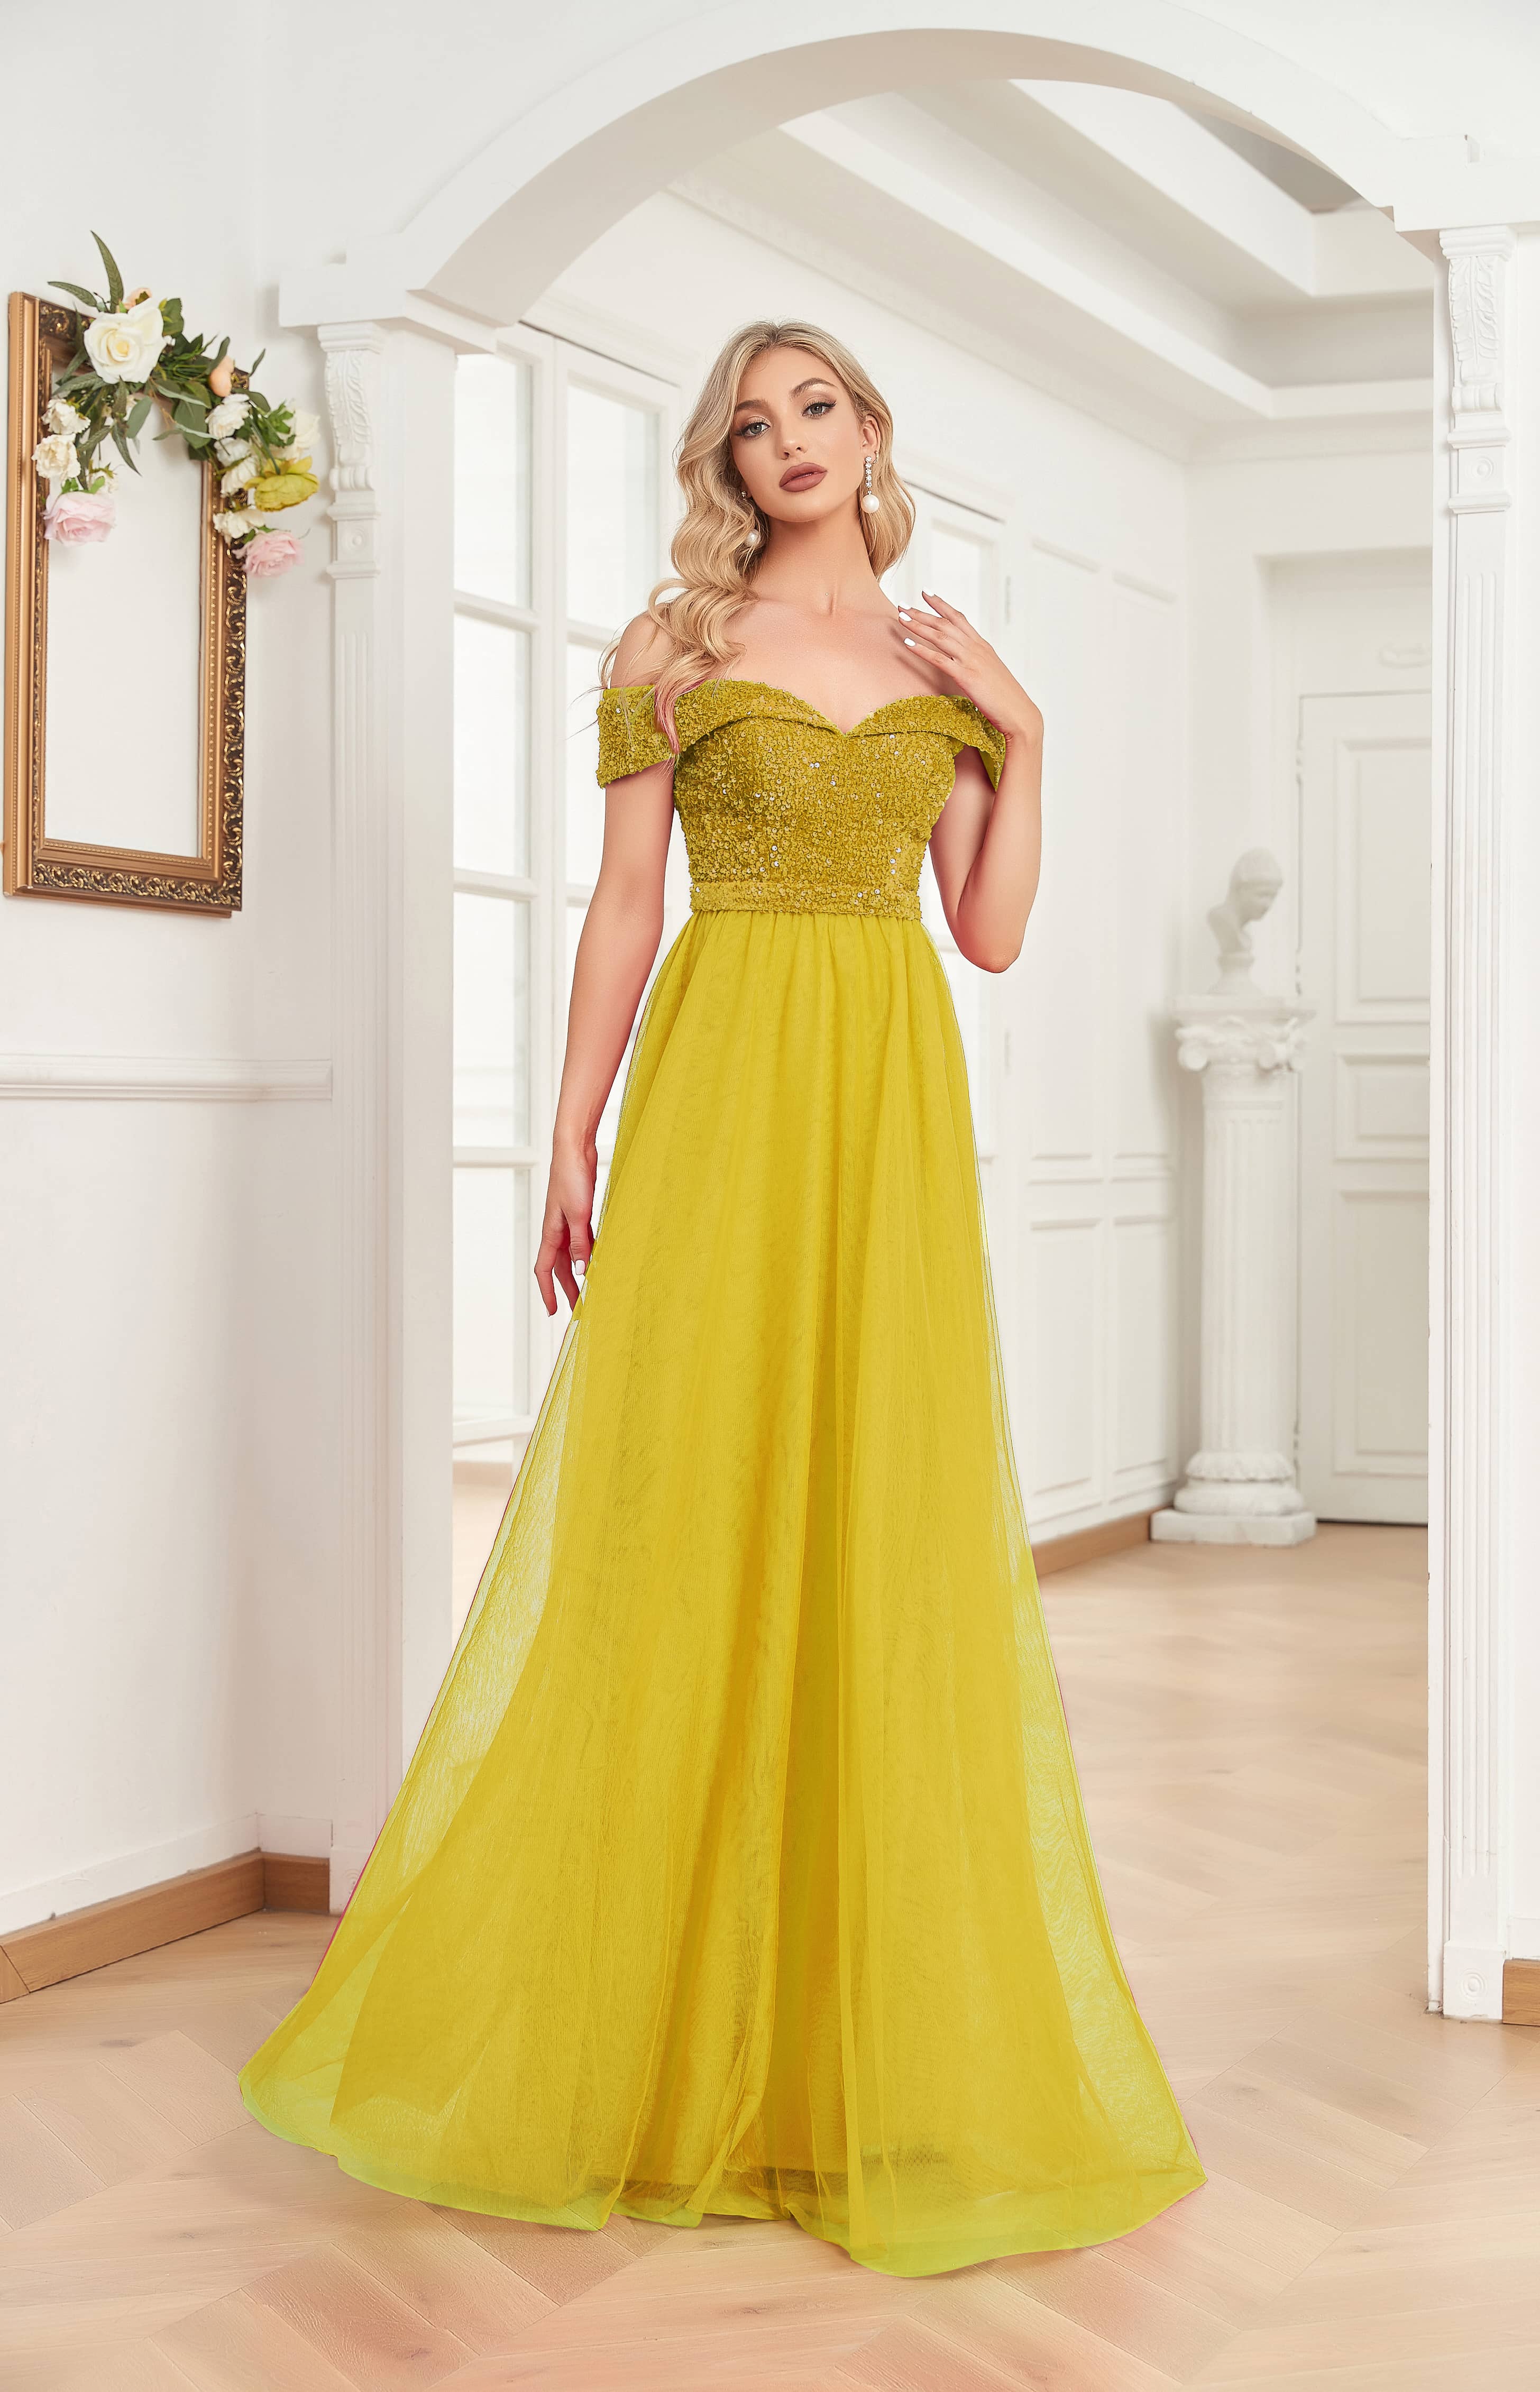 XUIBOL |  An off-the-shoulder_sweetheart_neckline_Dresses_Yellow